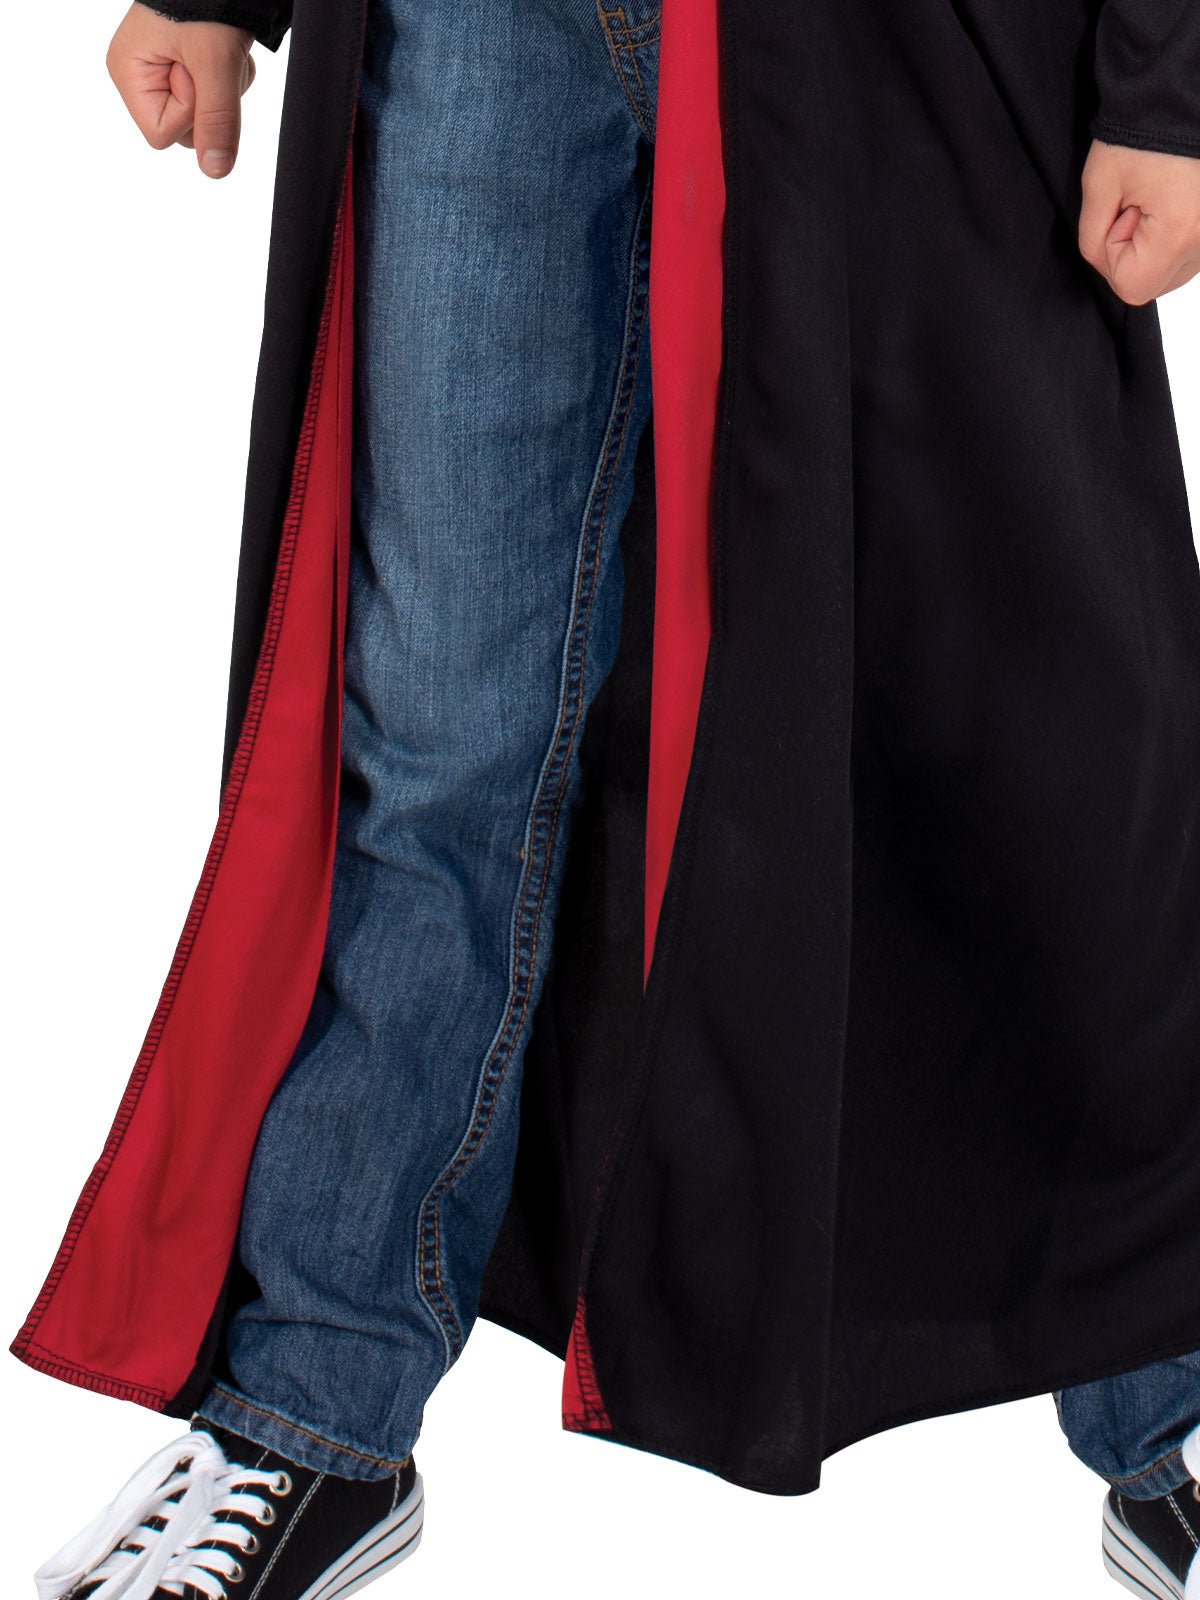 Shop the Look: Harry Potter Hooded Robe & Tie Set for Kids